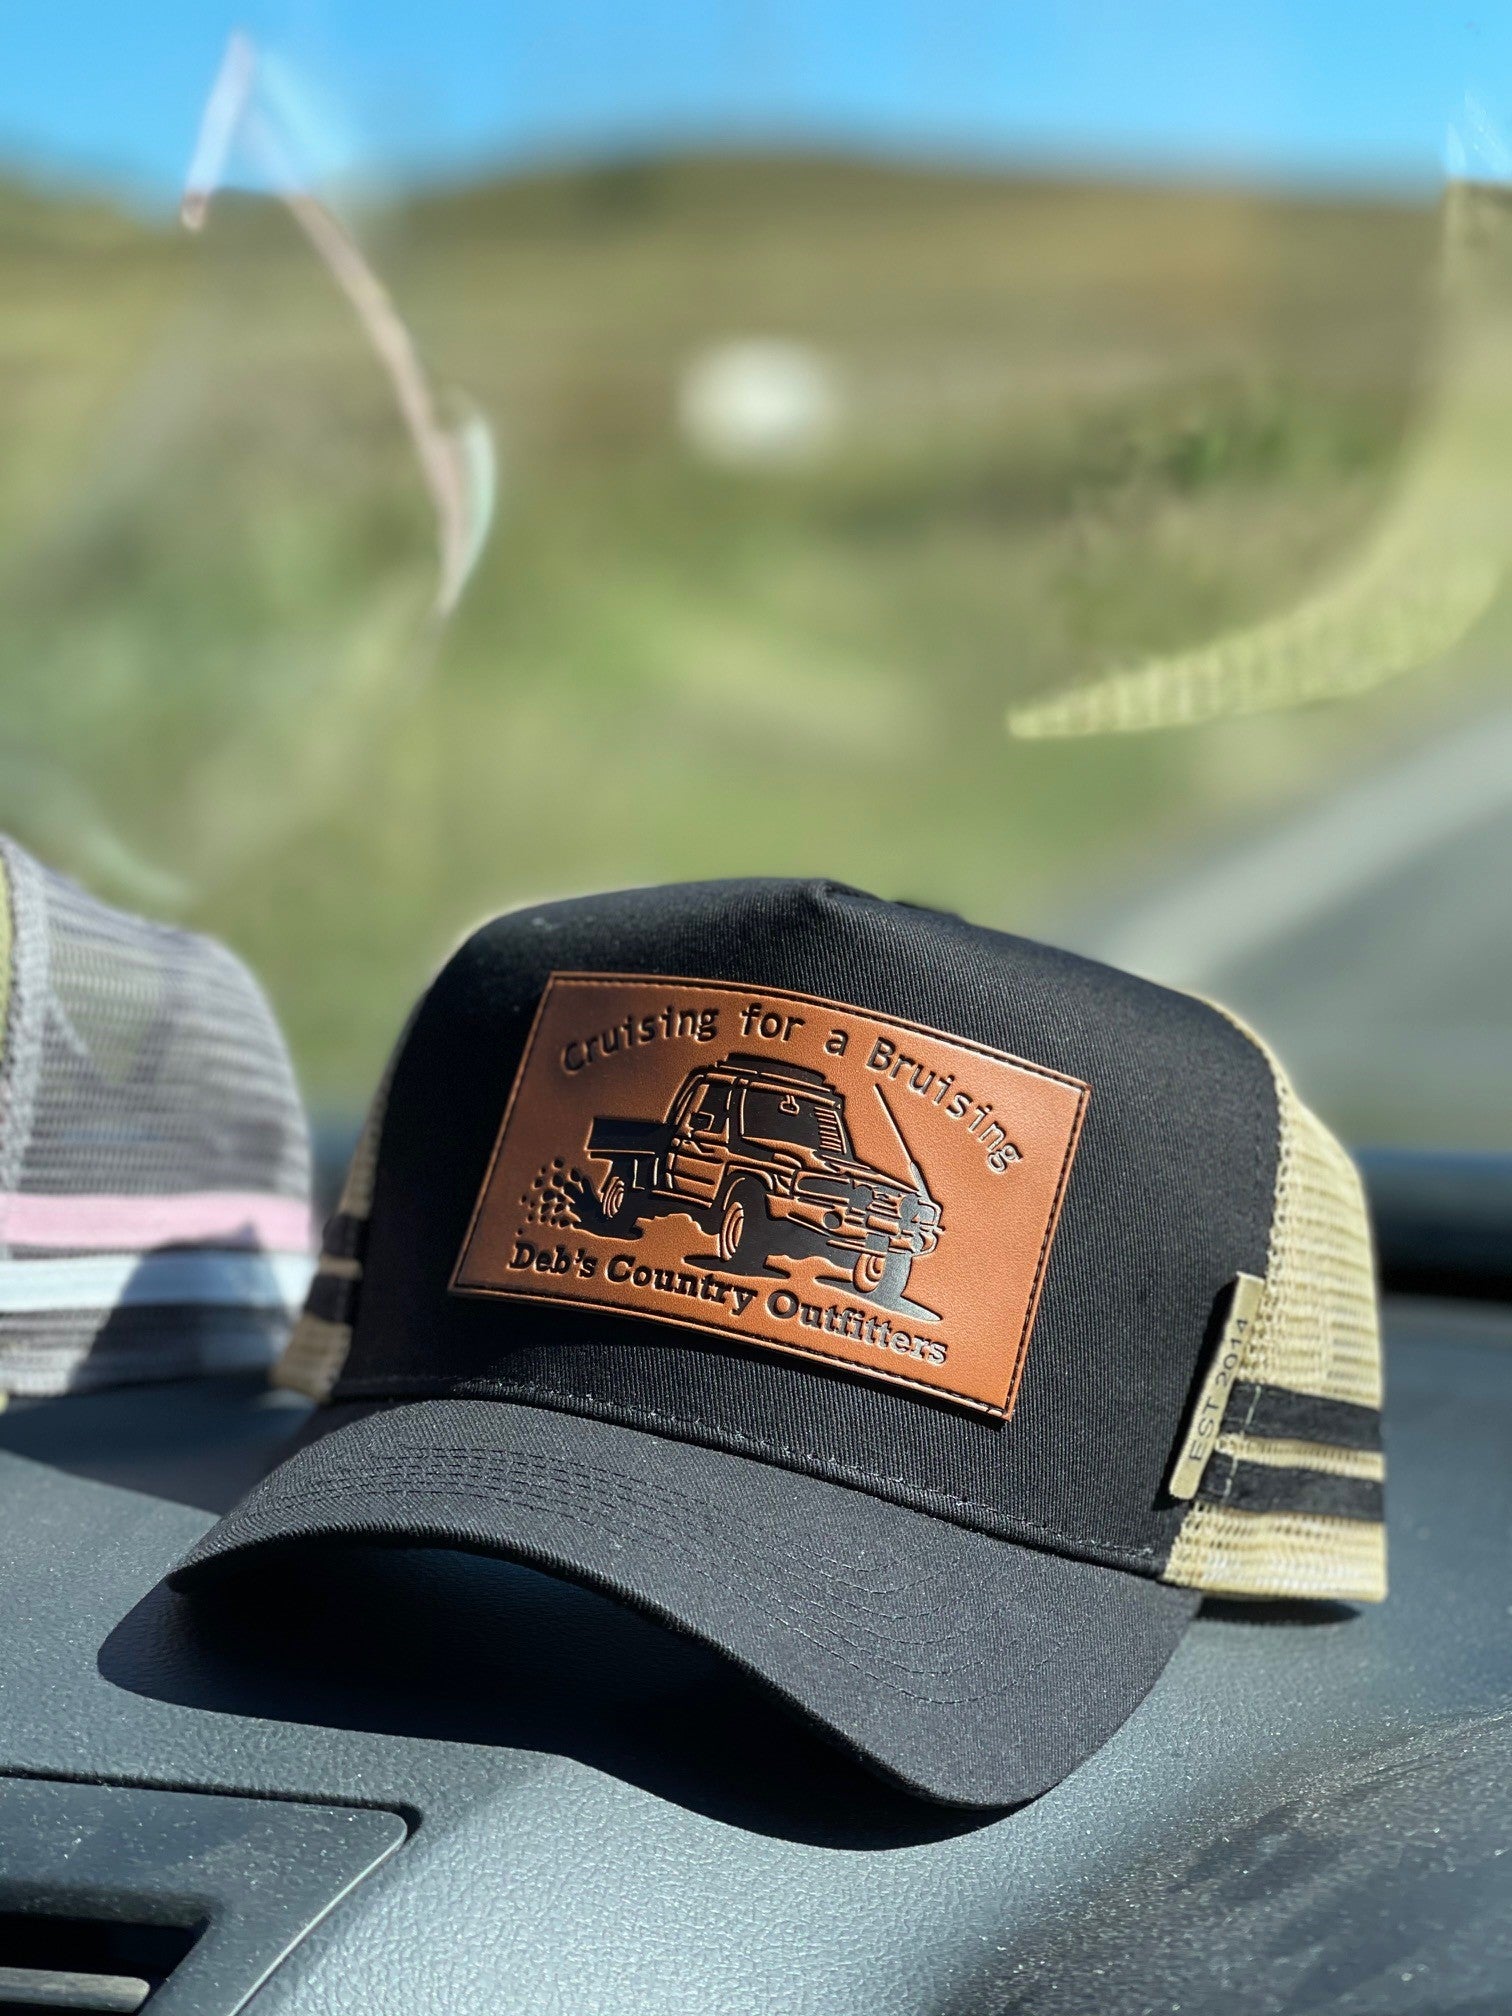 Debs Country Outfitters Black Cruising for a Bruising Trucker (4910656782413)